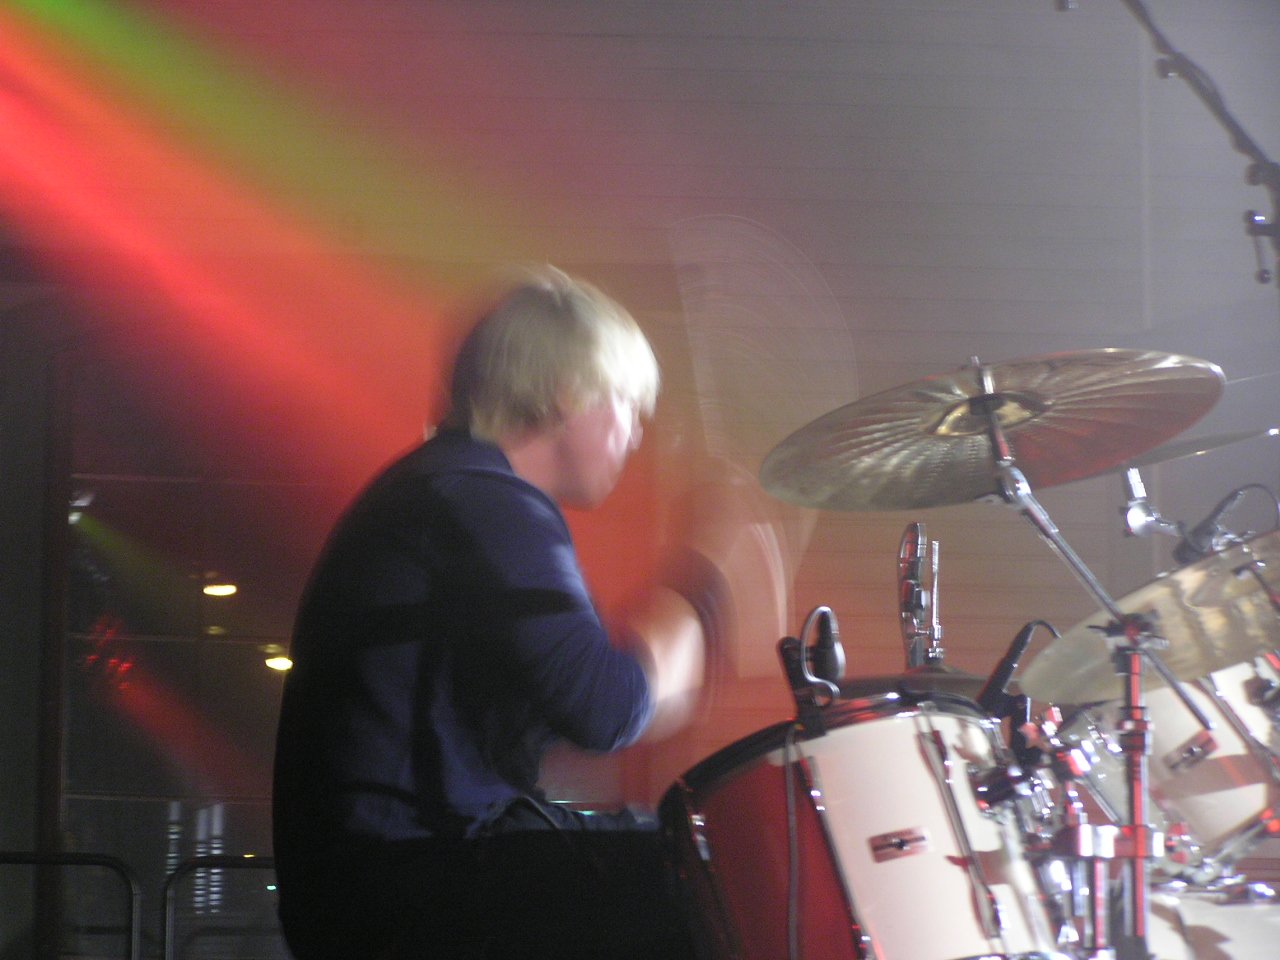 drummer in front of his drum set in front of a red and green light